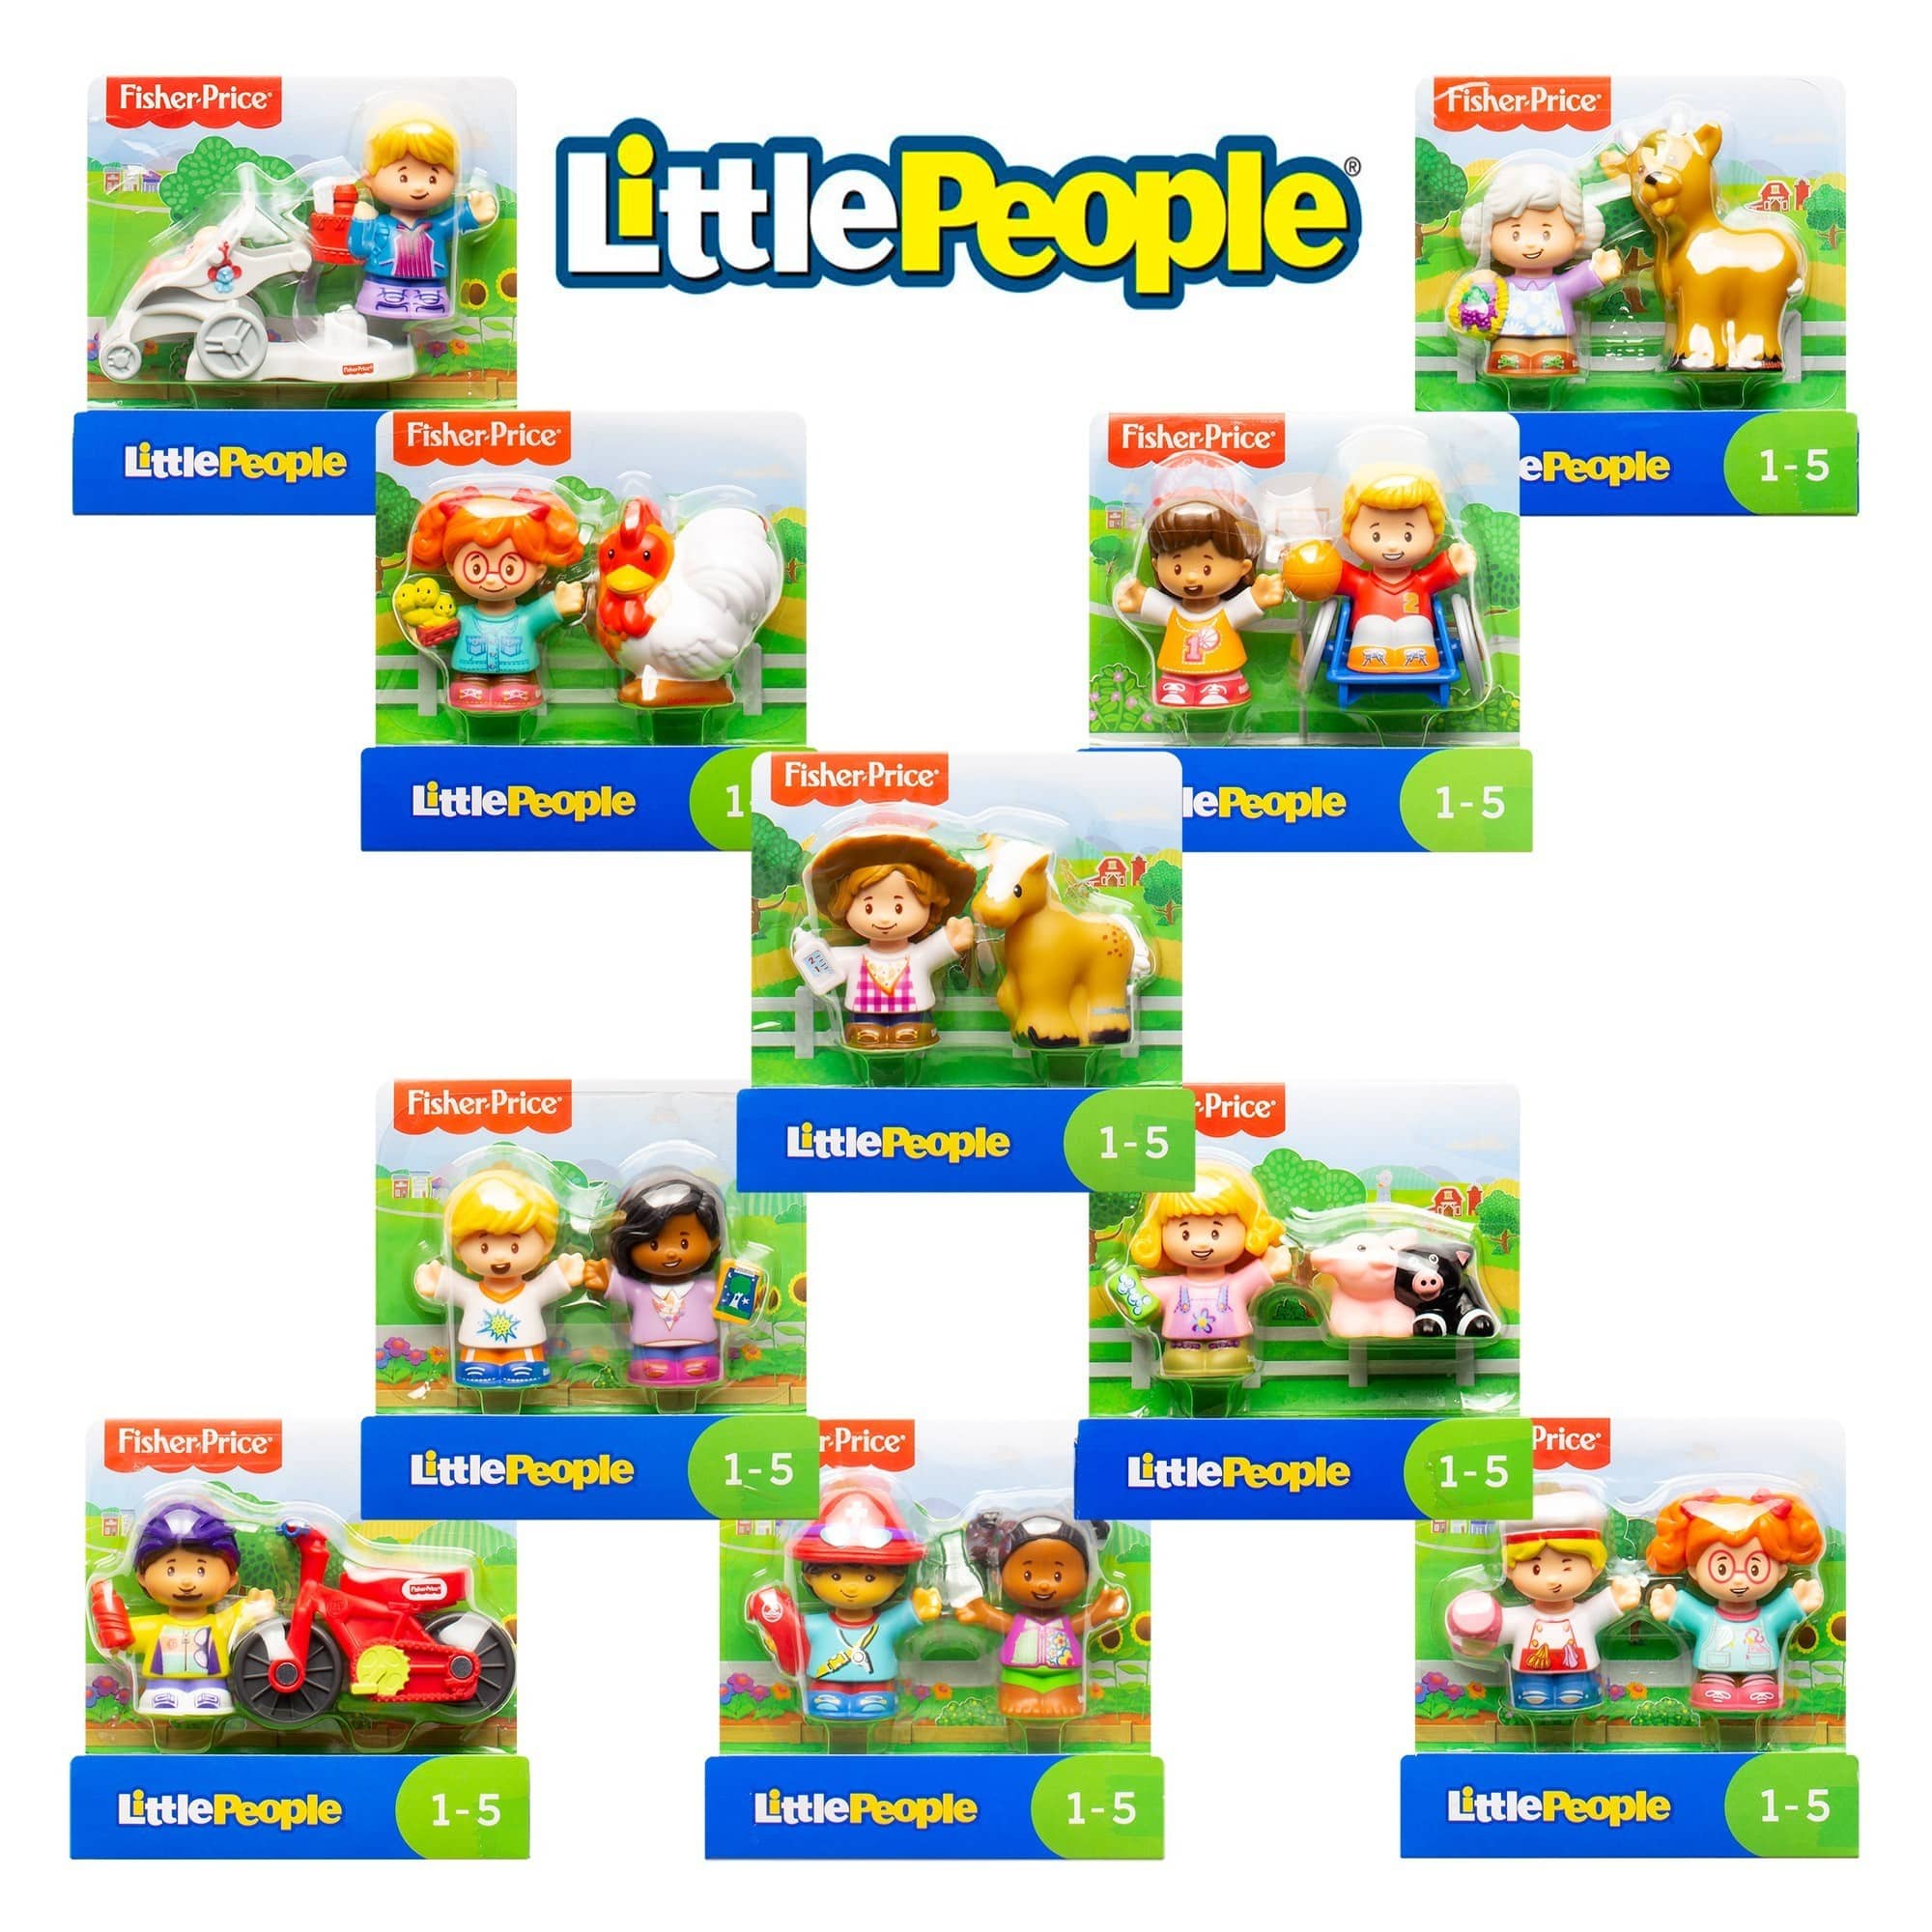 Fisher Price - Little People Figures - 2 Pack Assortment